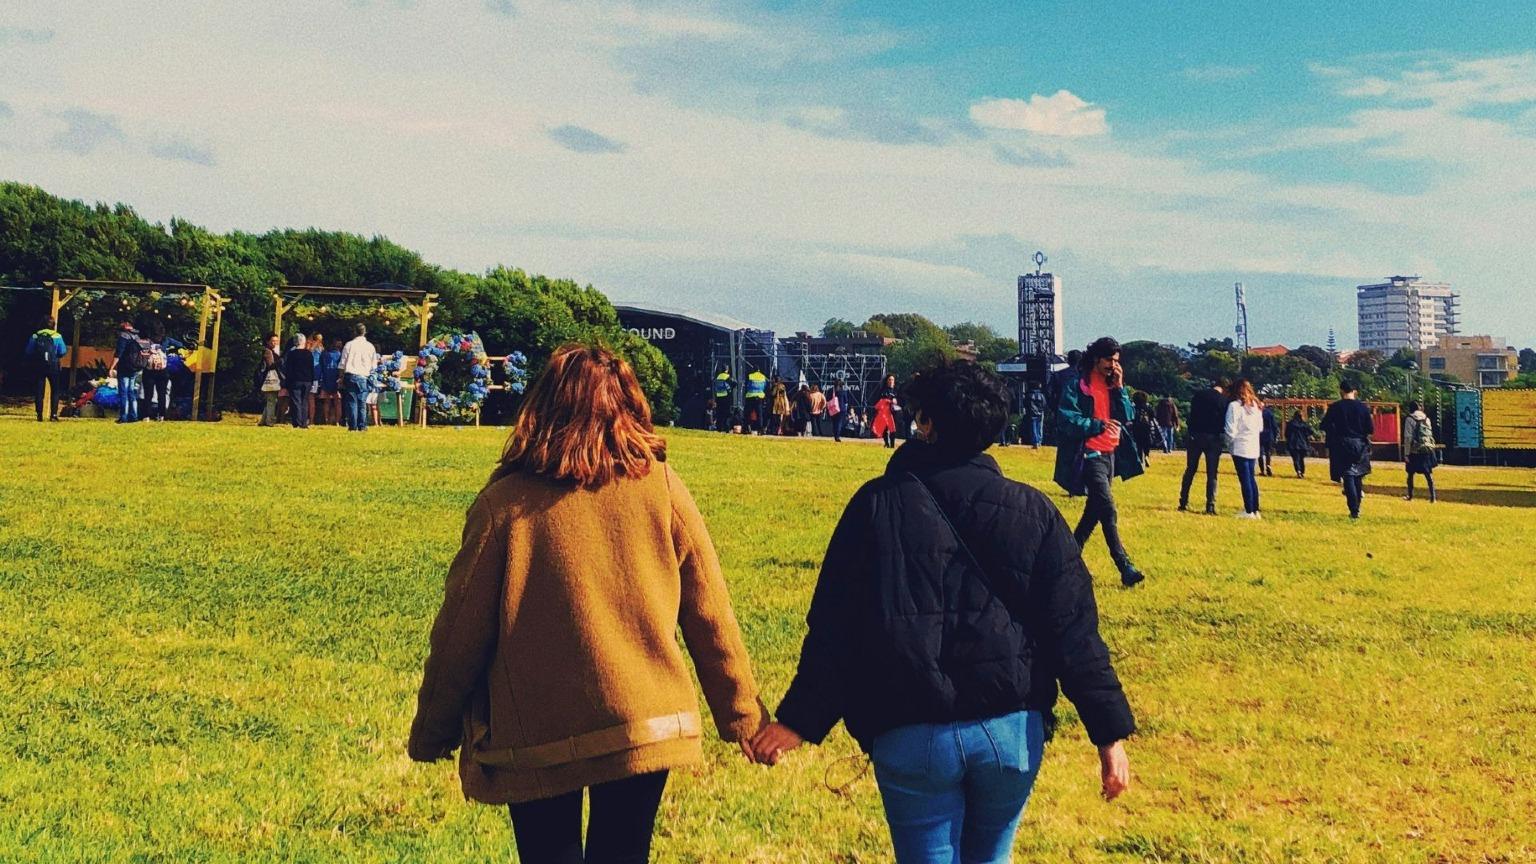 Festival-goers walk across the grassy fields of Primavera Sound in Porto during the day, enjoying the relaxed atmosphere and exploring various attractions.